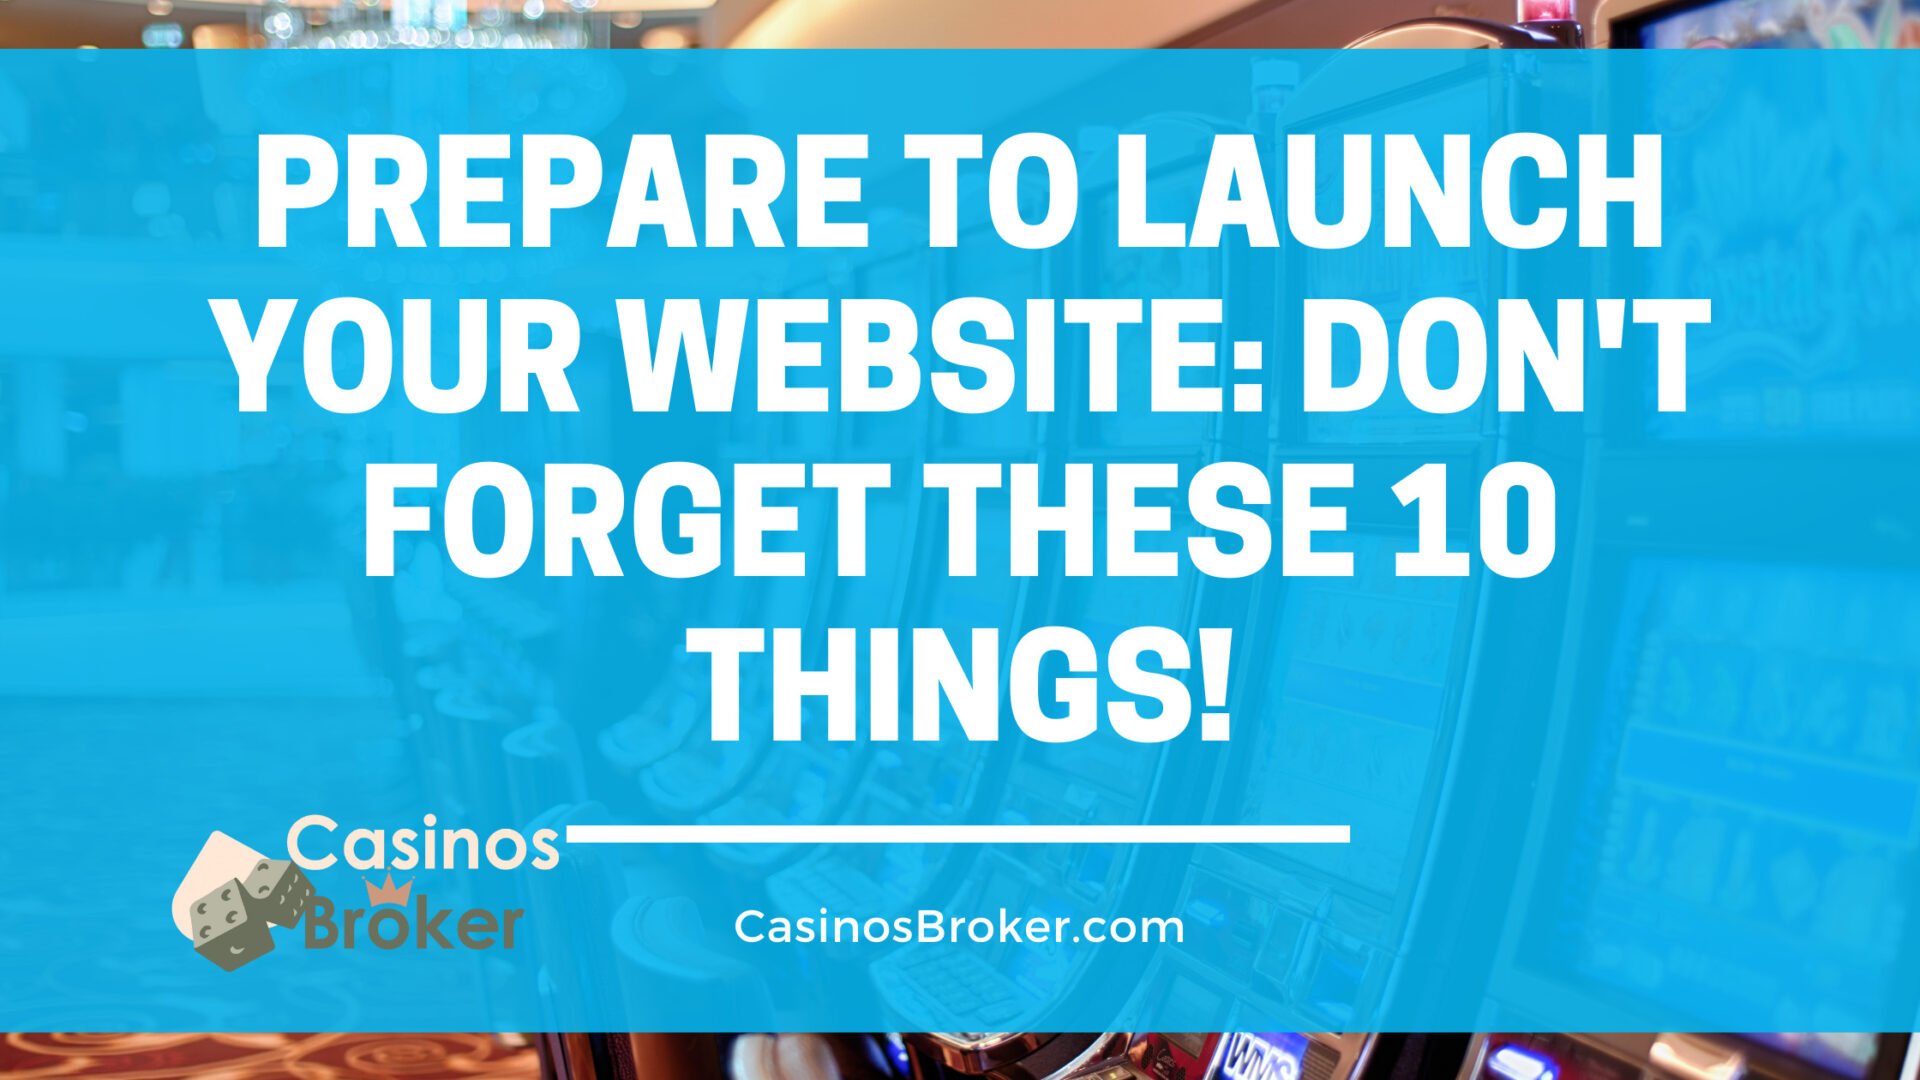 Prepare to launch your website: Don’t forget these 10 things!